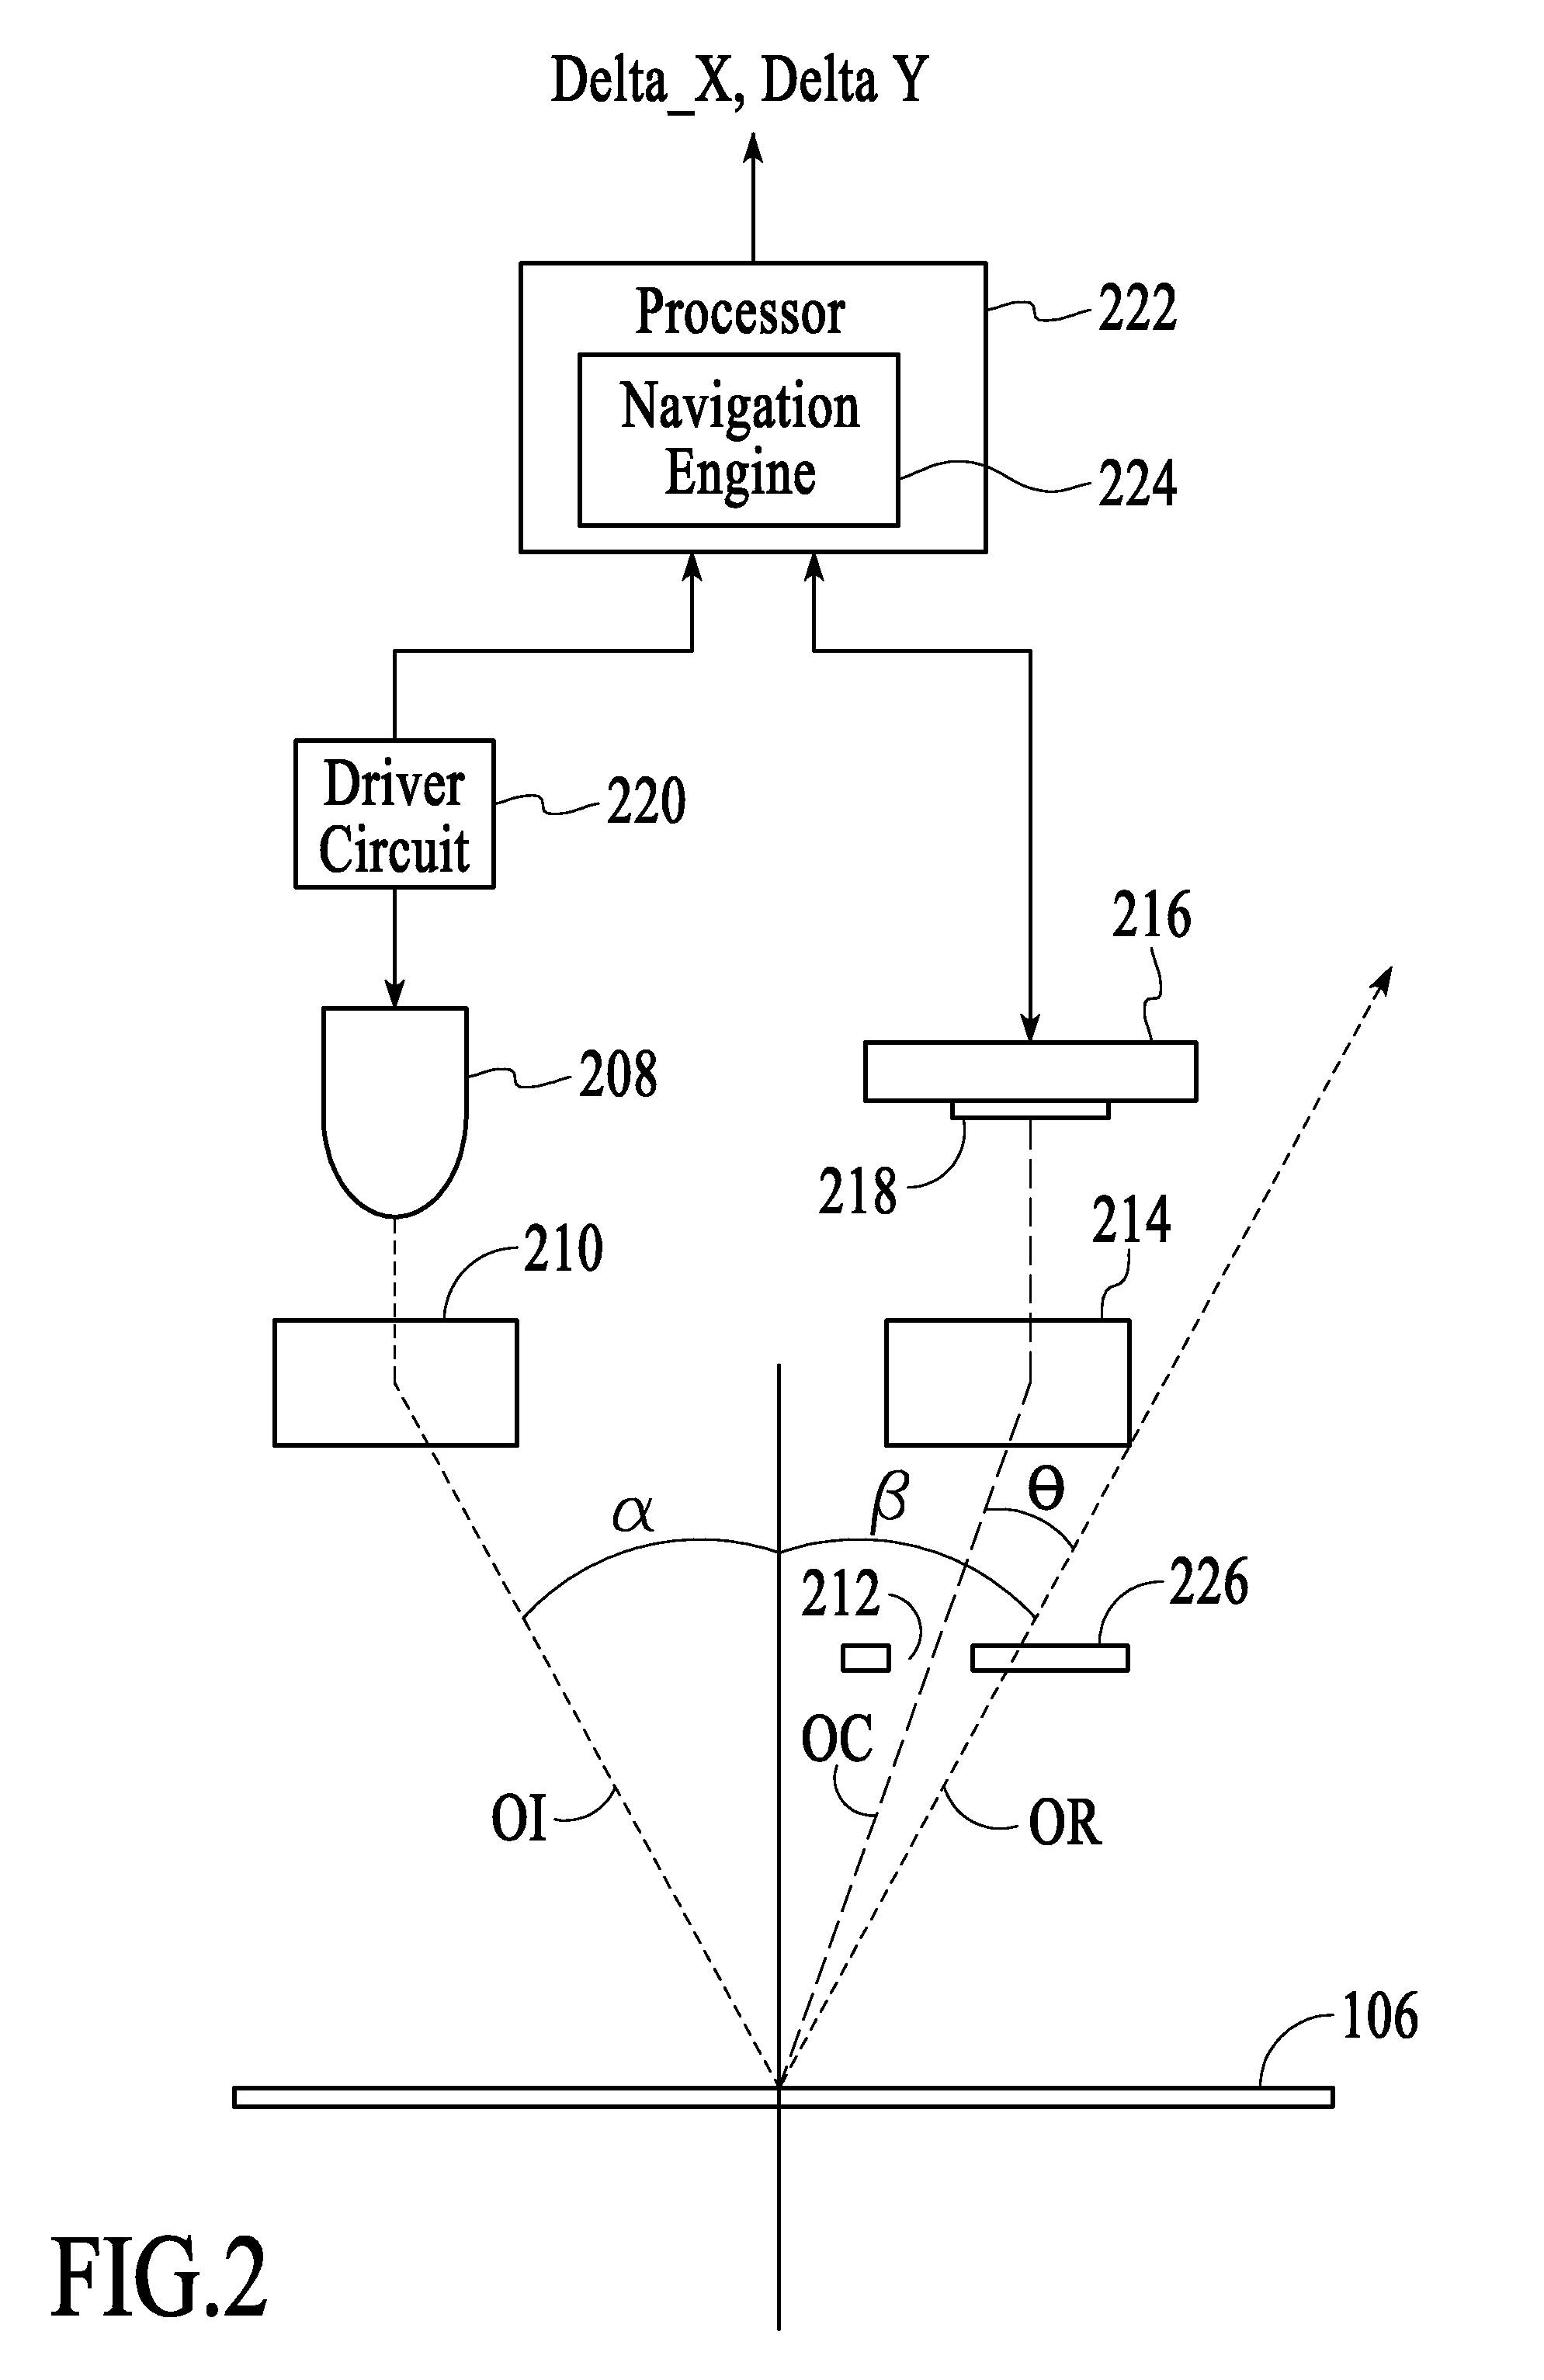 System and method for performing optical navigation using scattered light